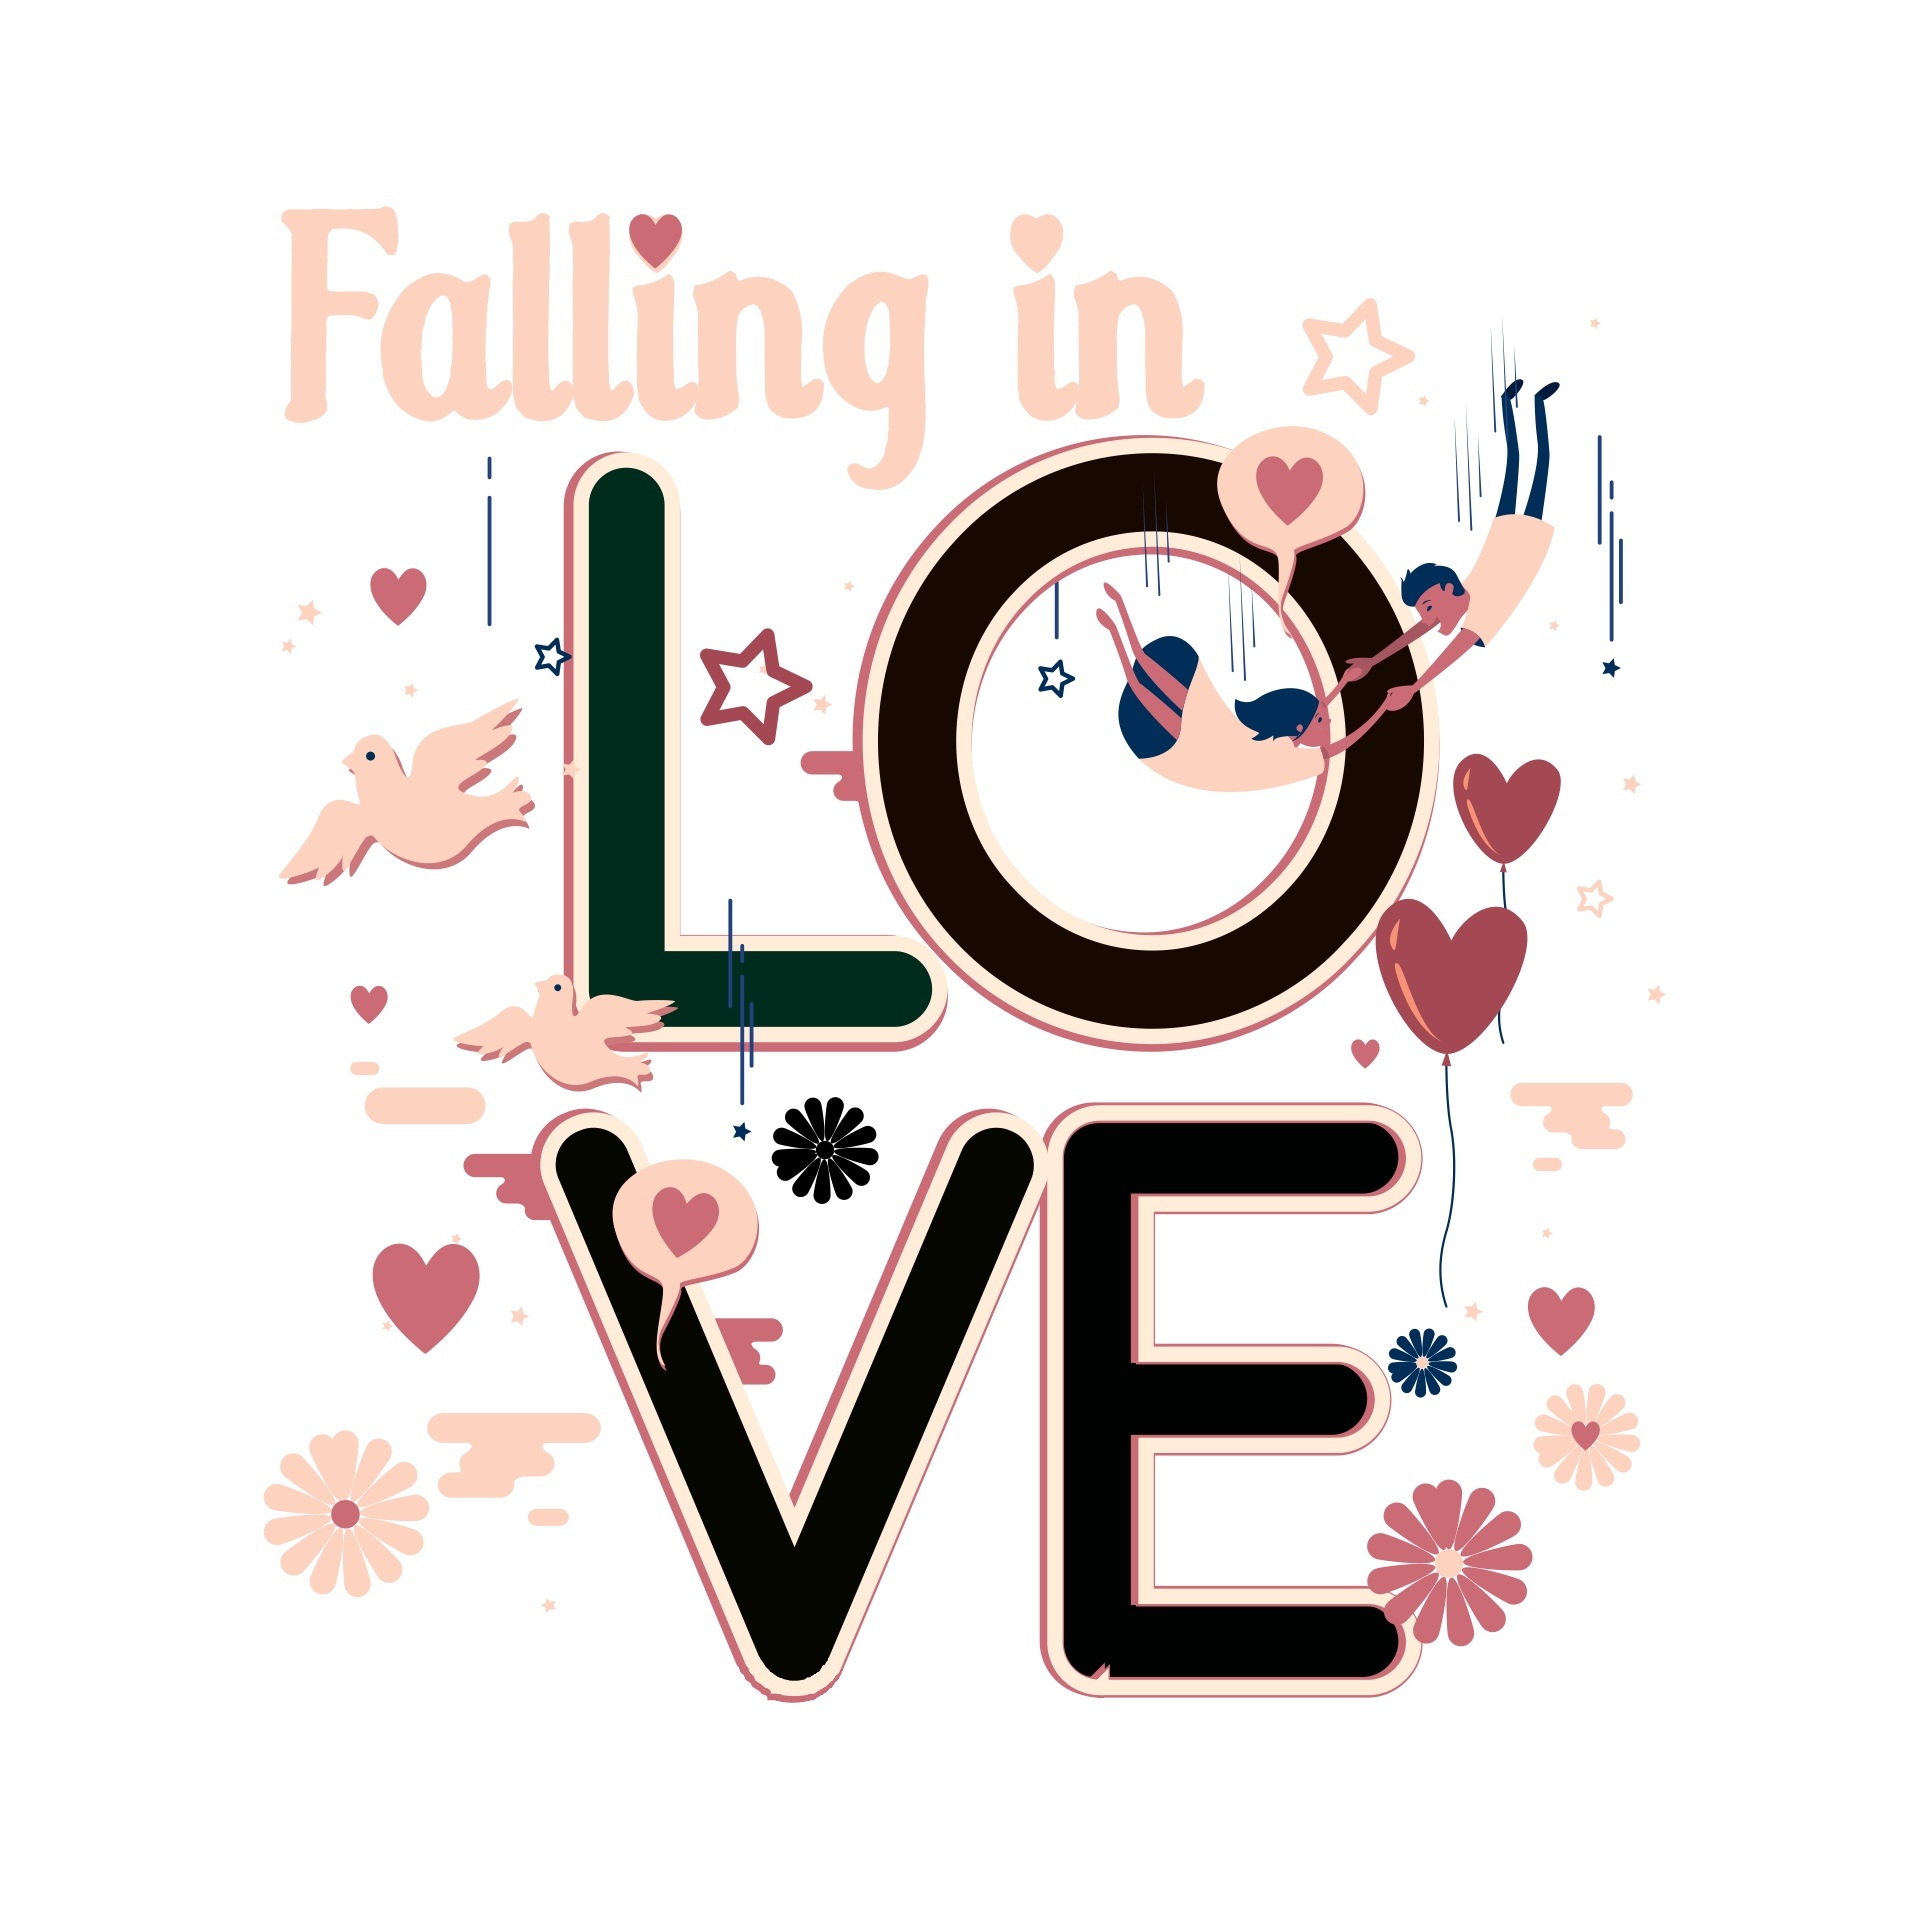 Love valentine falling in love drawing free image download